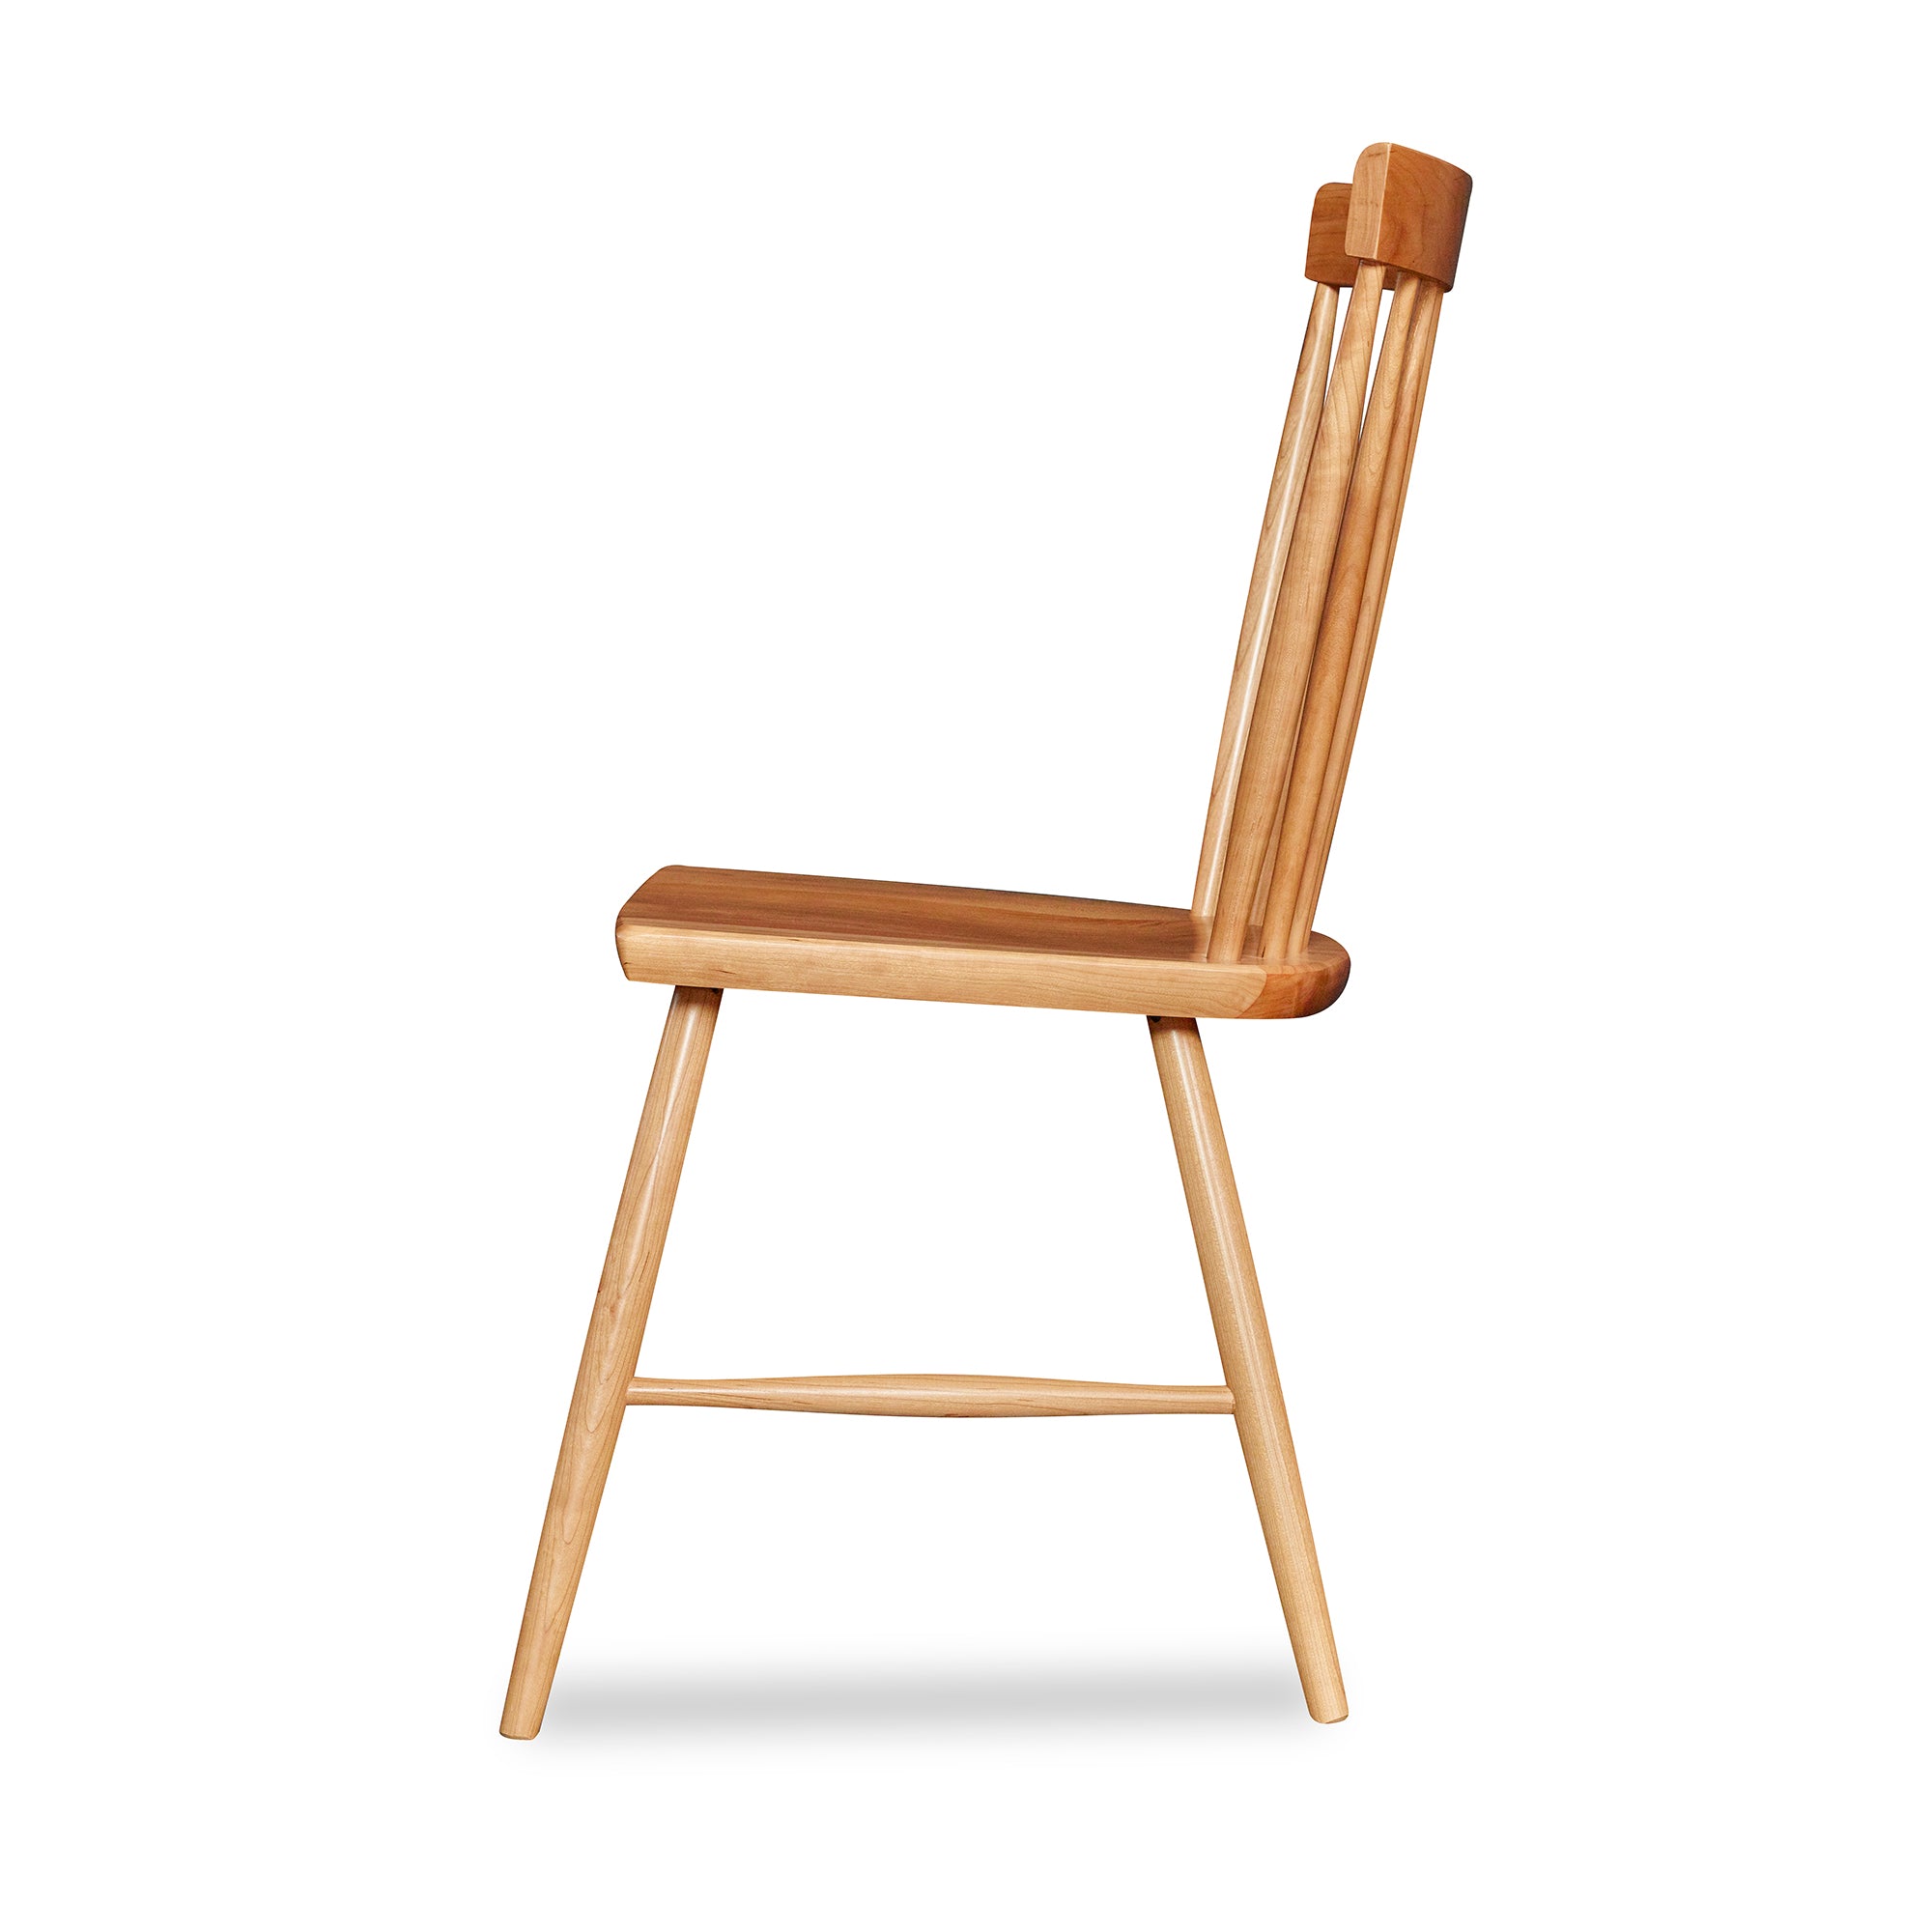 Side view of spindle style dining chair in cherry wood from Chilton Furniture